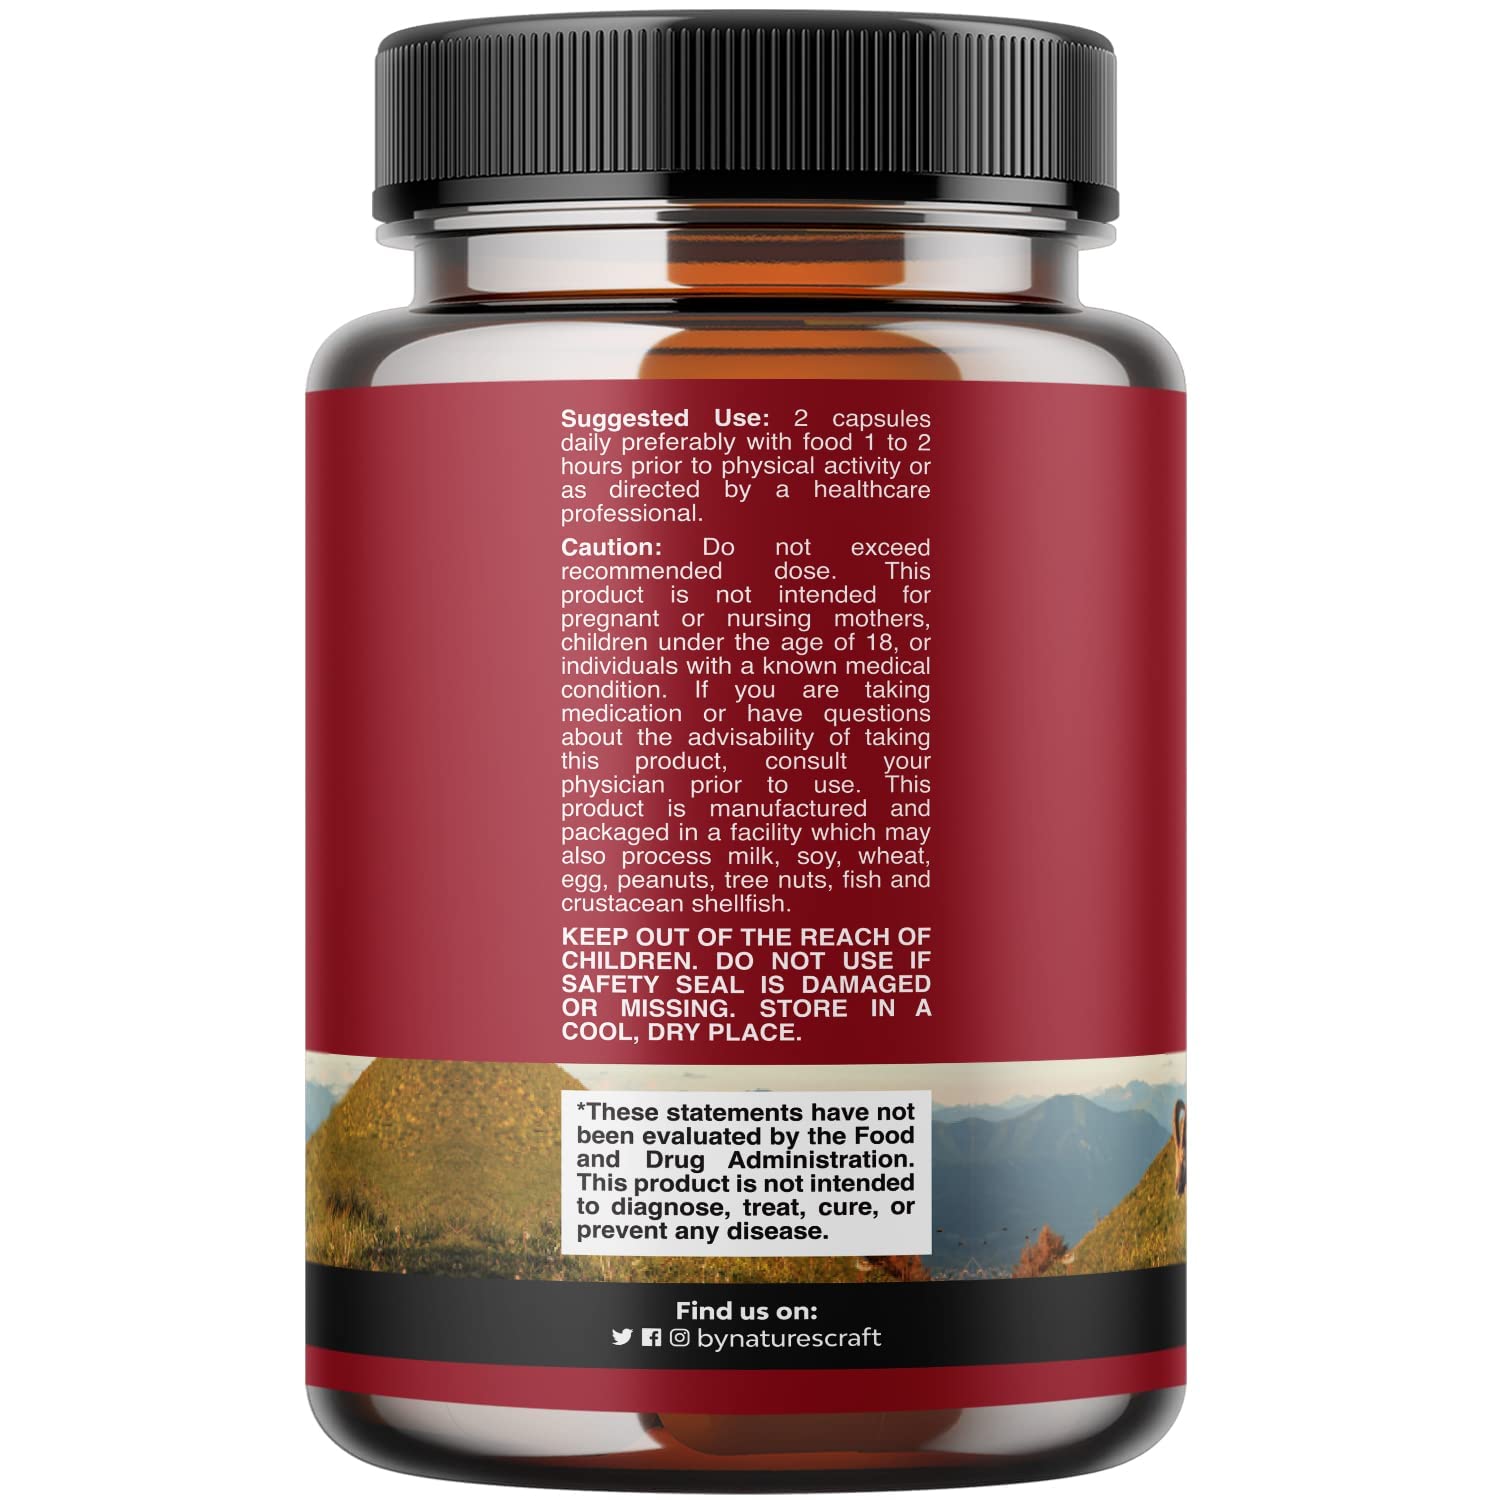 Horny Goat Weed Extract Complex - Invigorating Blend with Tribulus Saw Palmetto L Arginine and Tongkat Ali Extract and Maca Root for Men and Women for Enhanced Energy and Stamina - 30 Servings